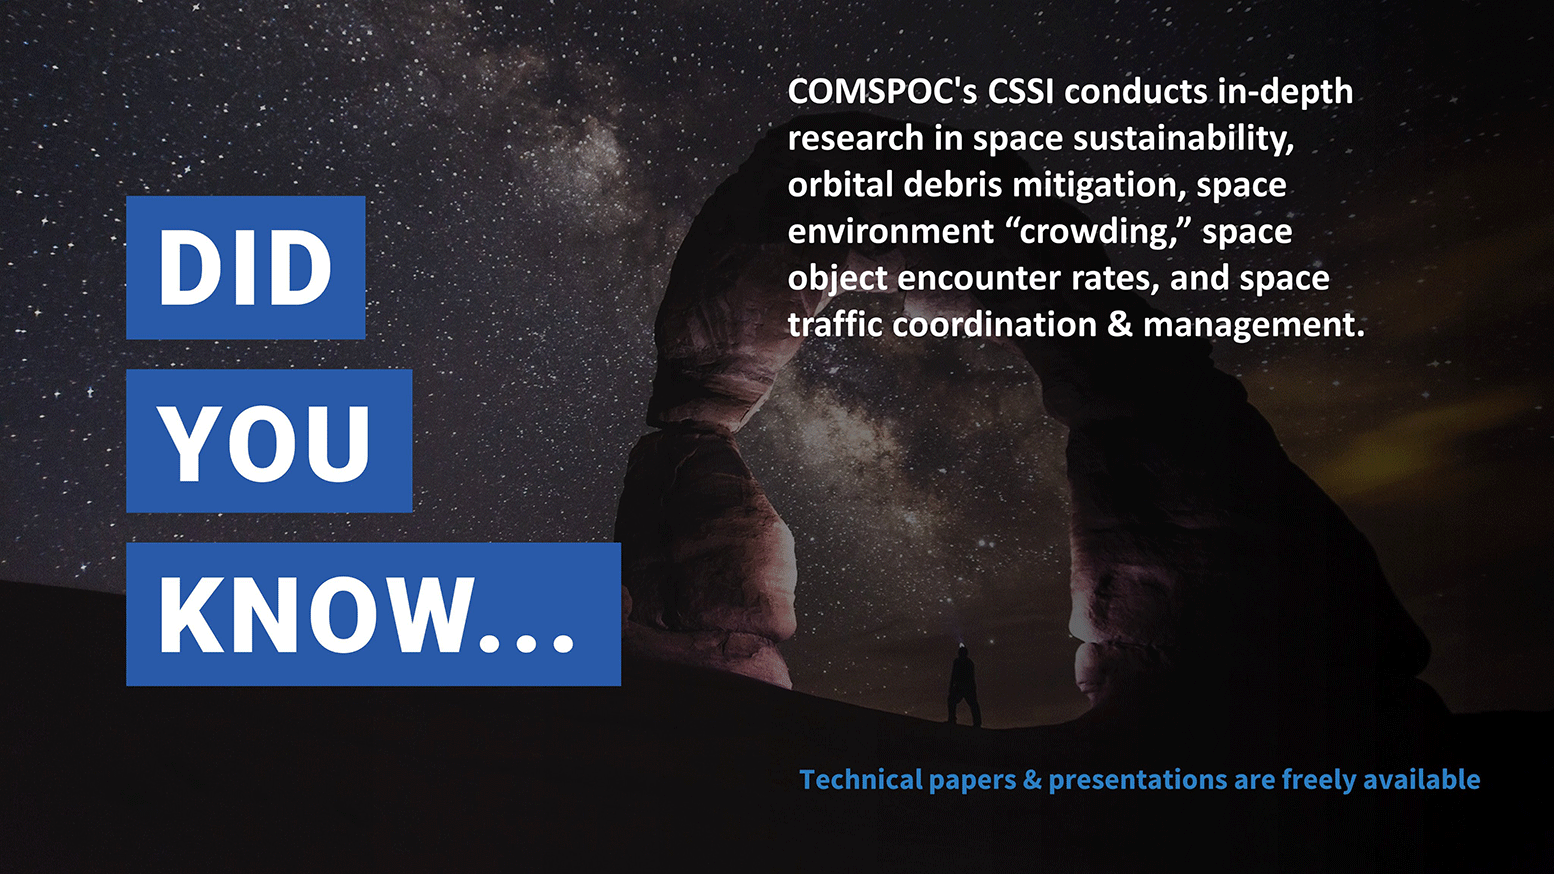 Did You Know: COMSPOC's CSSI conducts in-depth research in space sustainability and orbital debris mitigation.